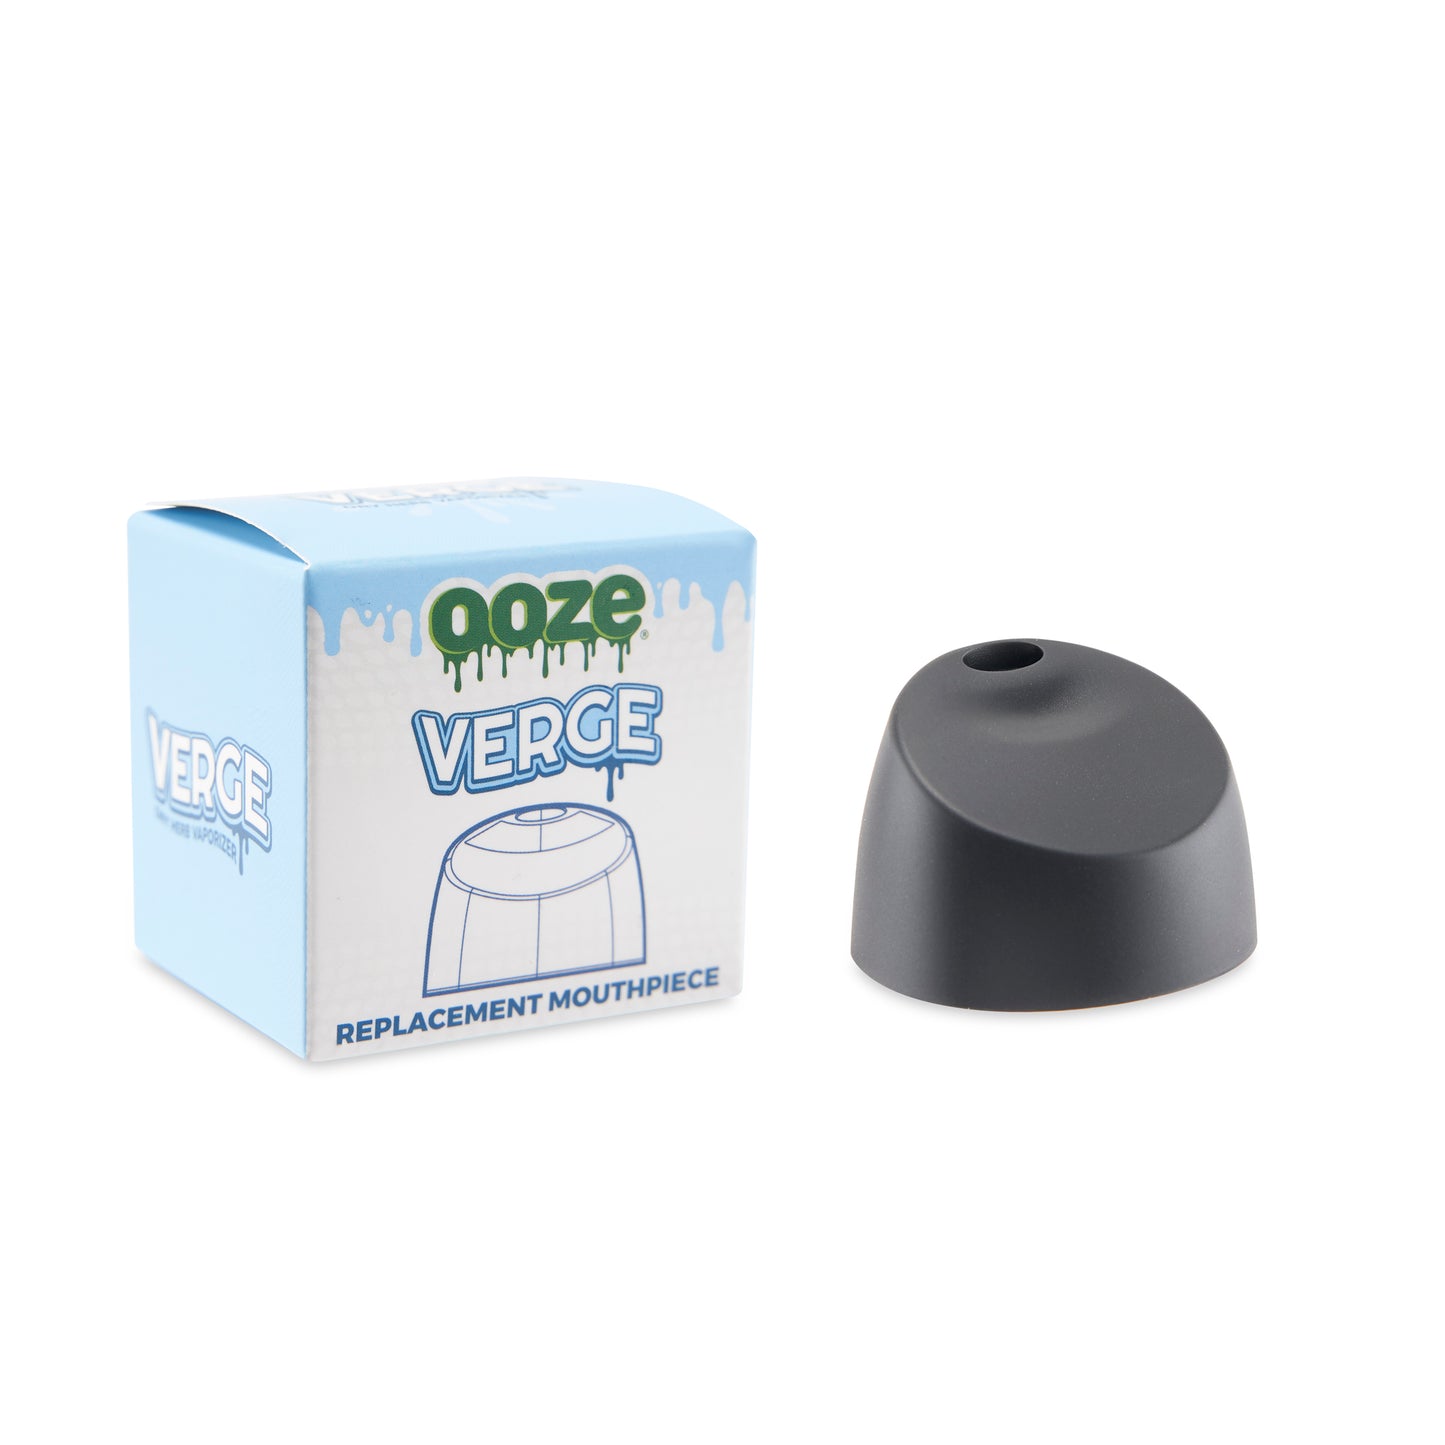 The black magnetic replacement mouthpiece for the Ooze Verge is to the right of its box.